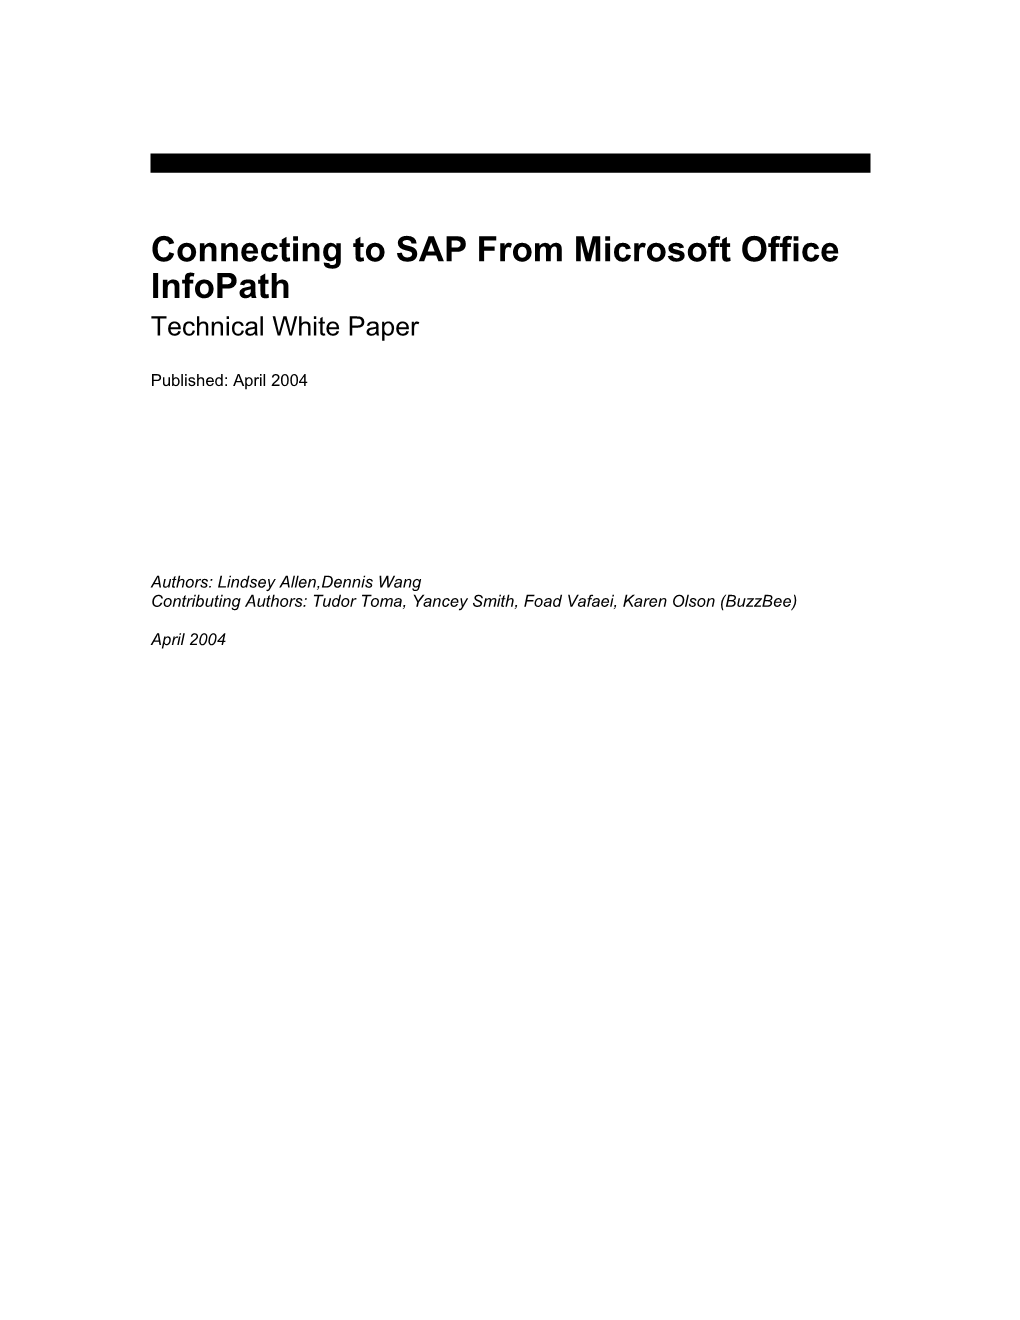 Connecting to SAP from Microsoft Office Infopath